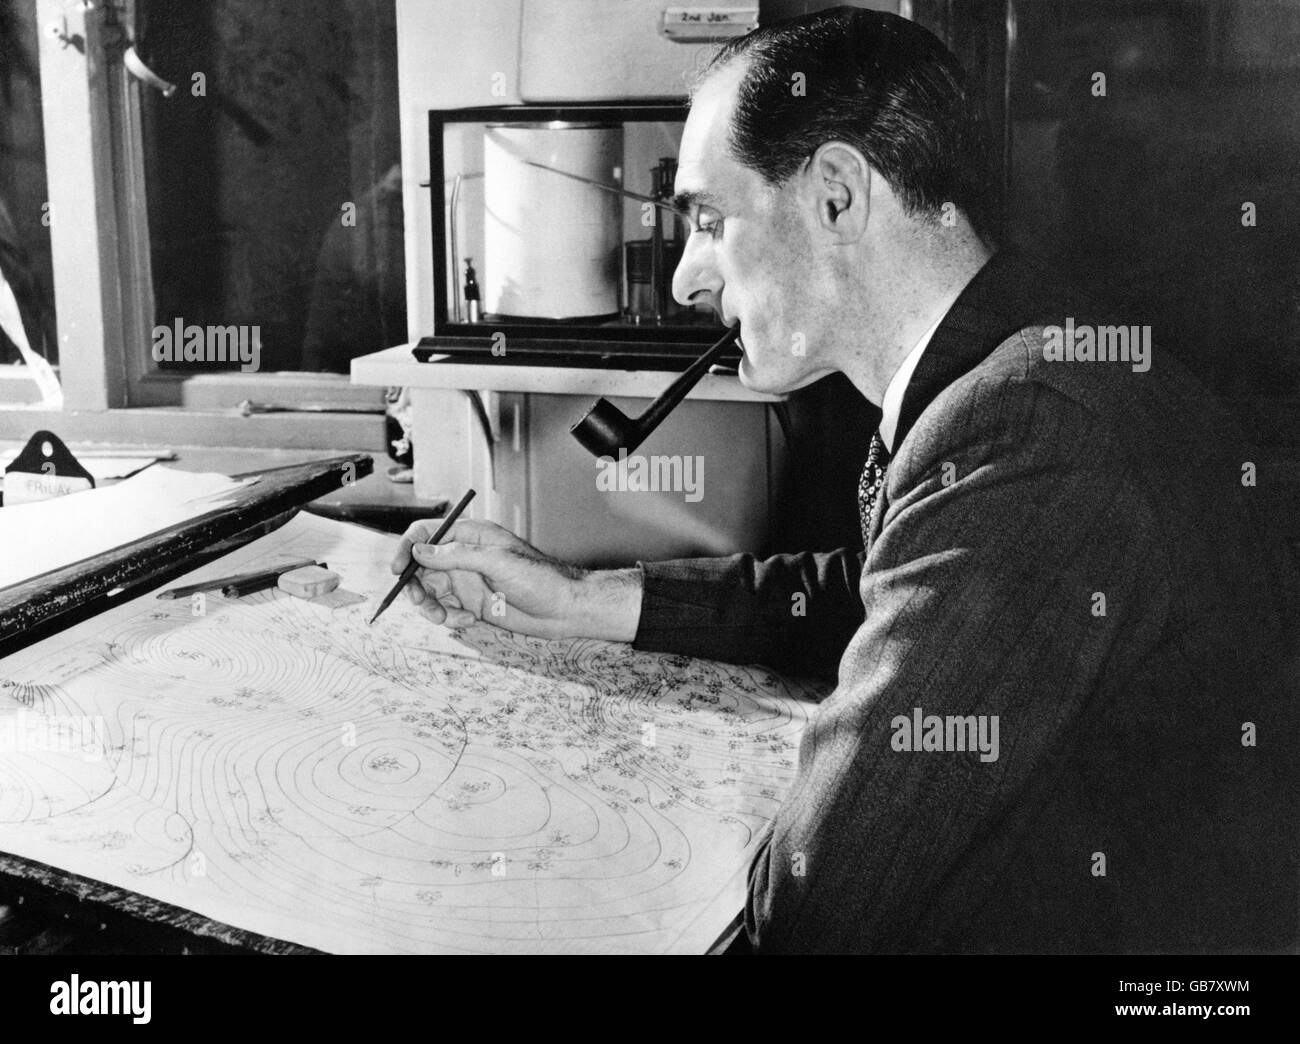 George Cowling, one of the two experts chosen by the BBC to brighten TV's presentation of the weather report and forecast, studies a chart at the Meteorological Office in Victory House, Kingsway, London. Stock Photo